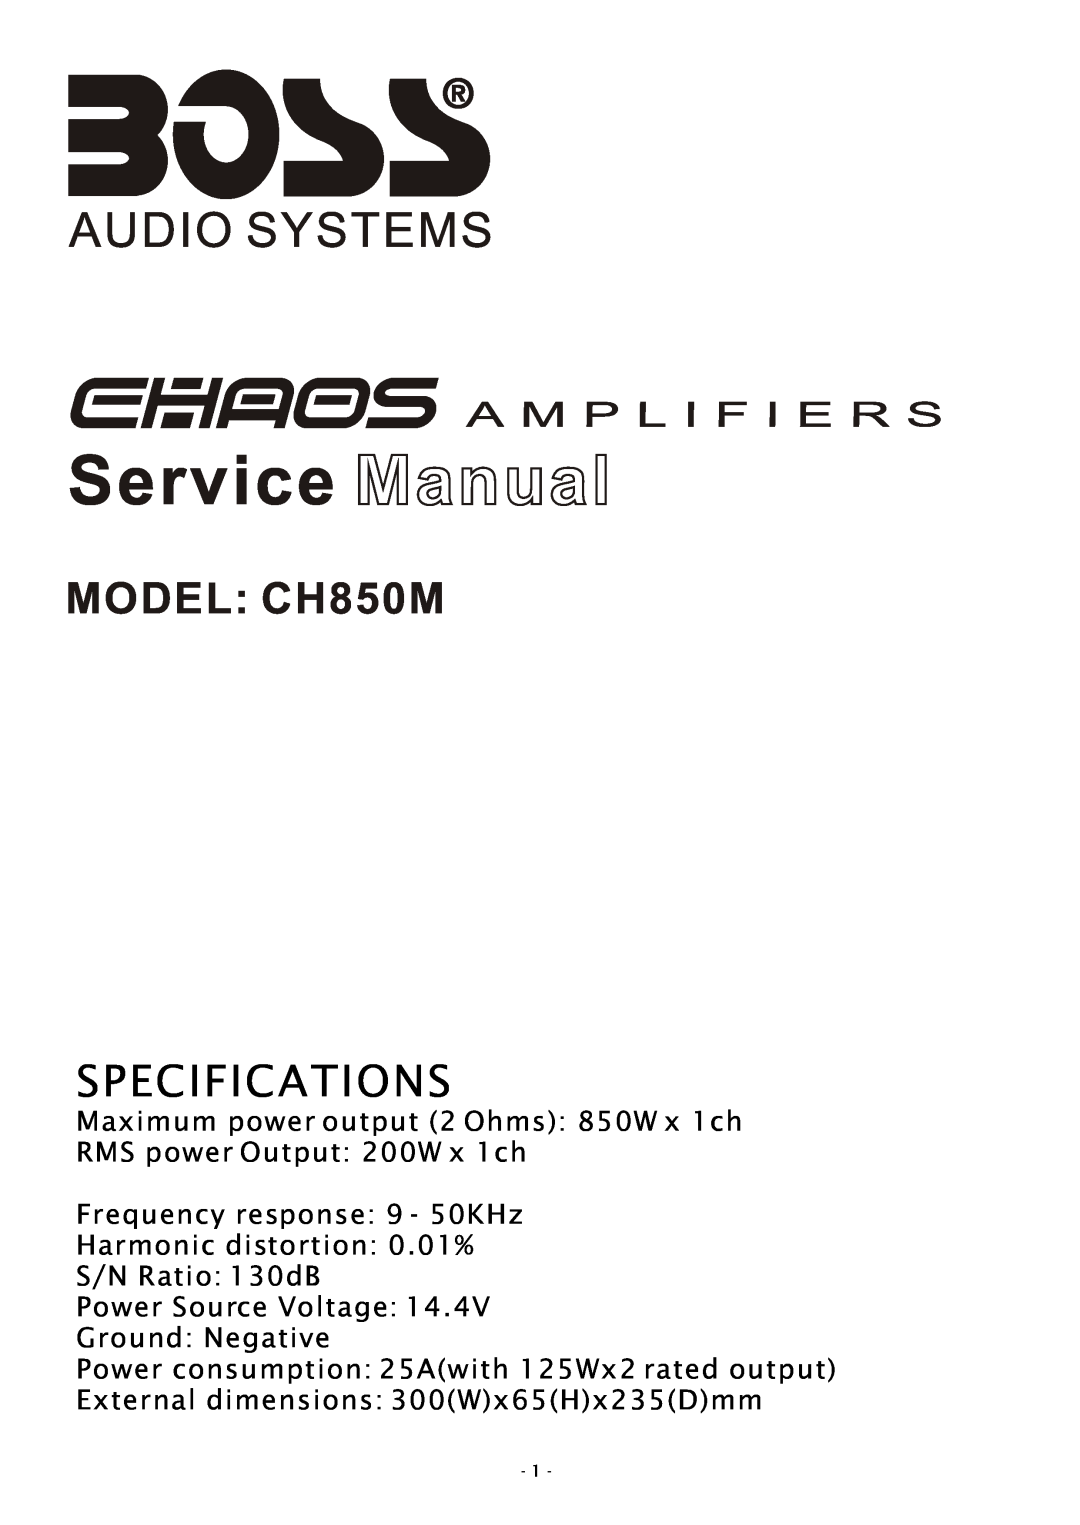 Boss Audio Systems specifications MODEL CH850M, Specifications, Maximum power output 2 Ohms 850W x 1ch 